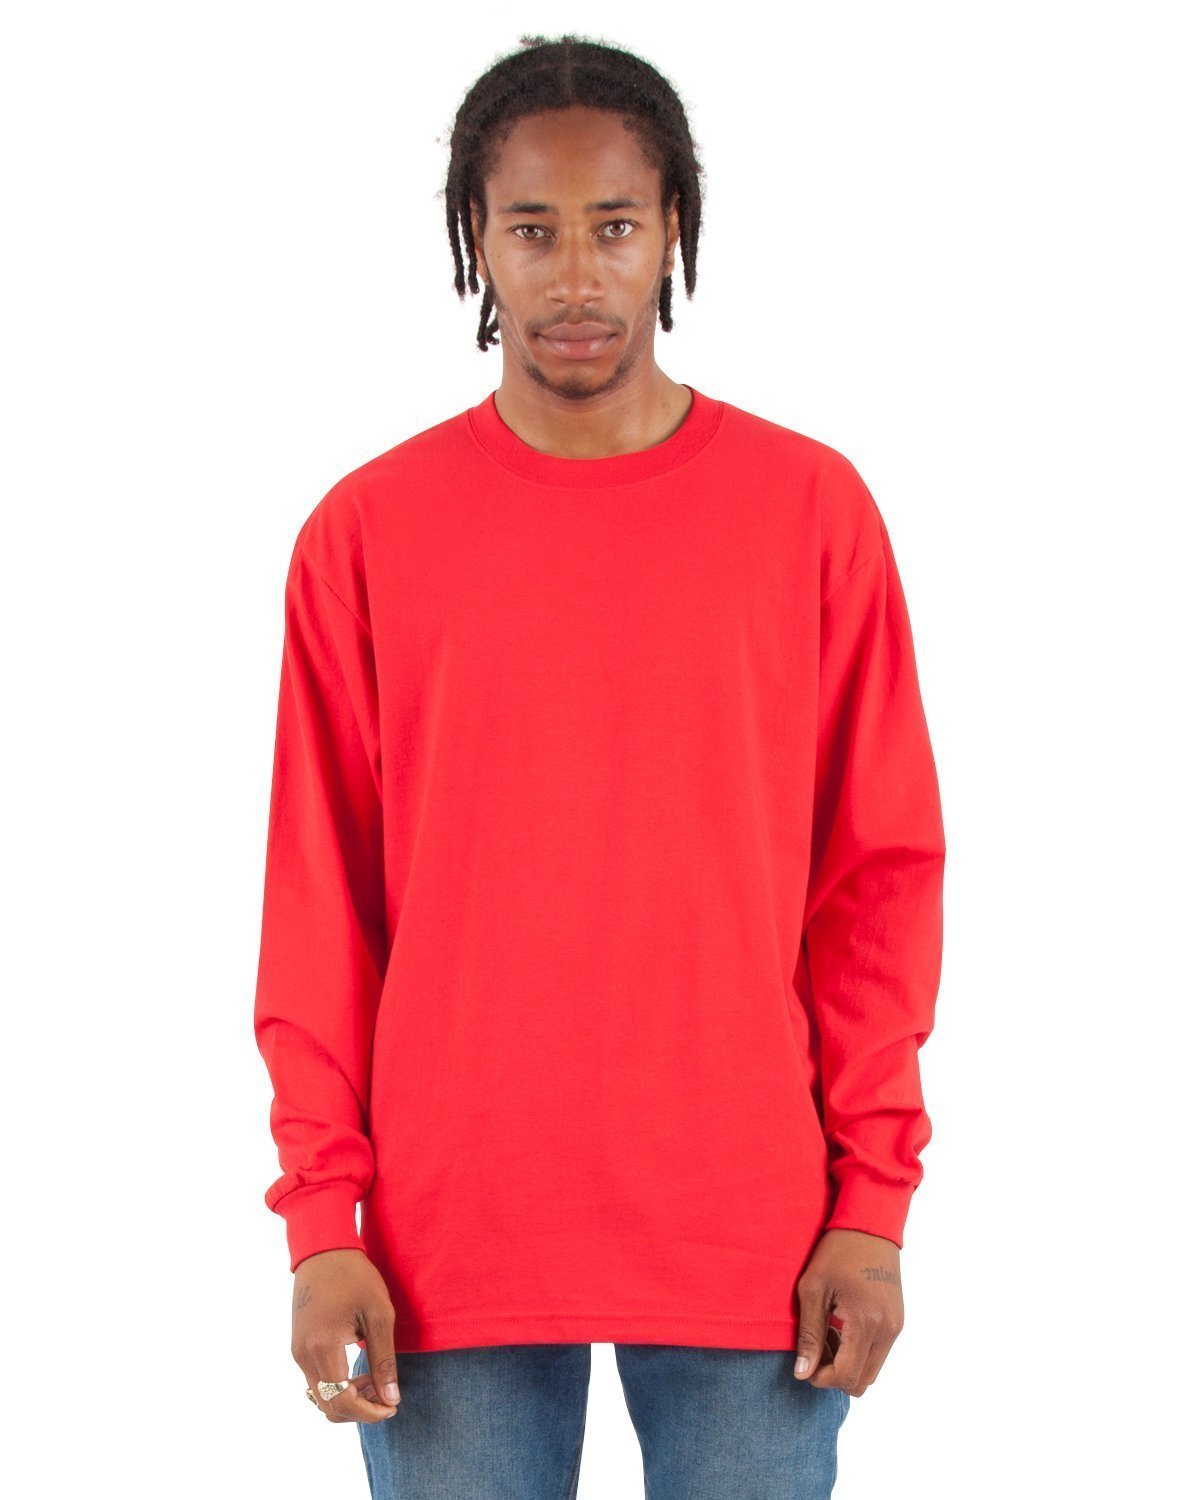 7.5 oz Max Heavyweight Long Sleeve - Large Sizes 5XL / Red